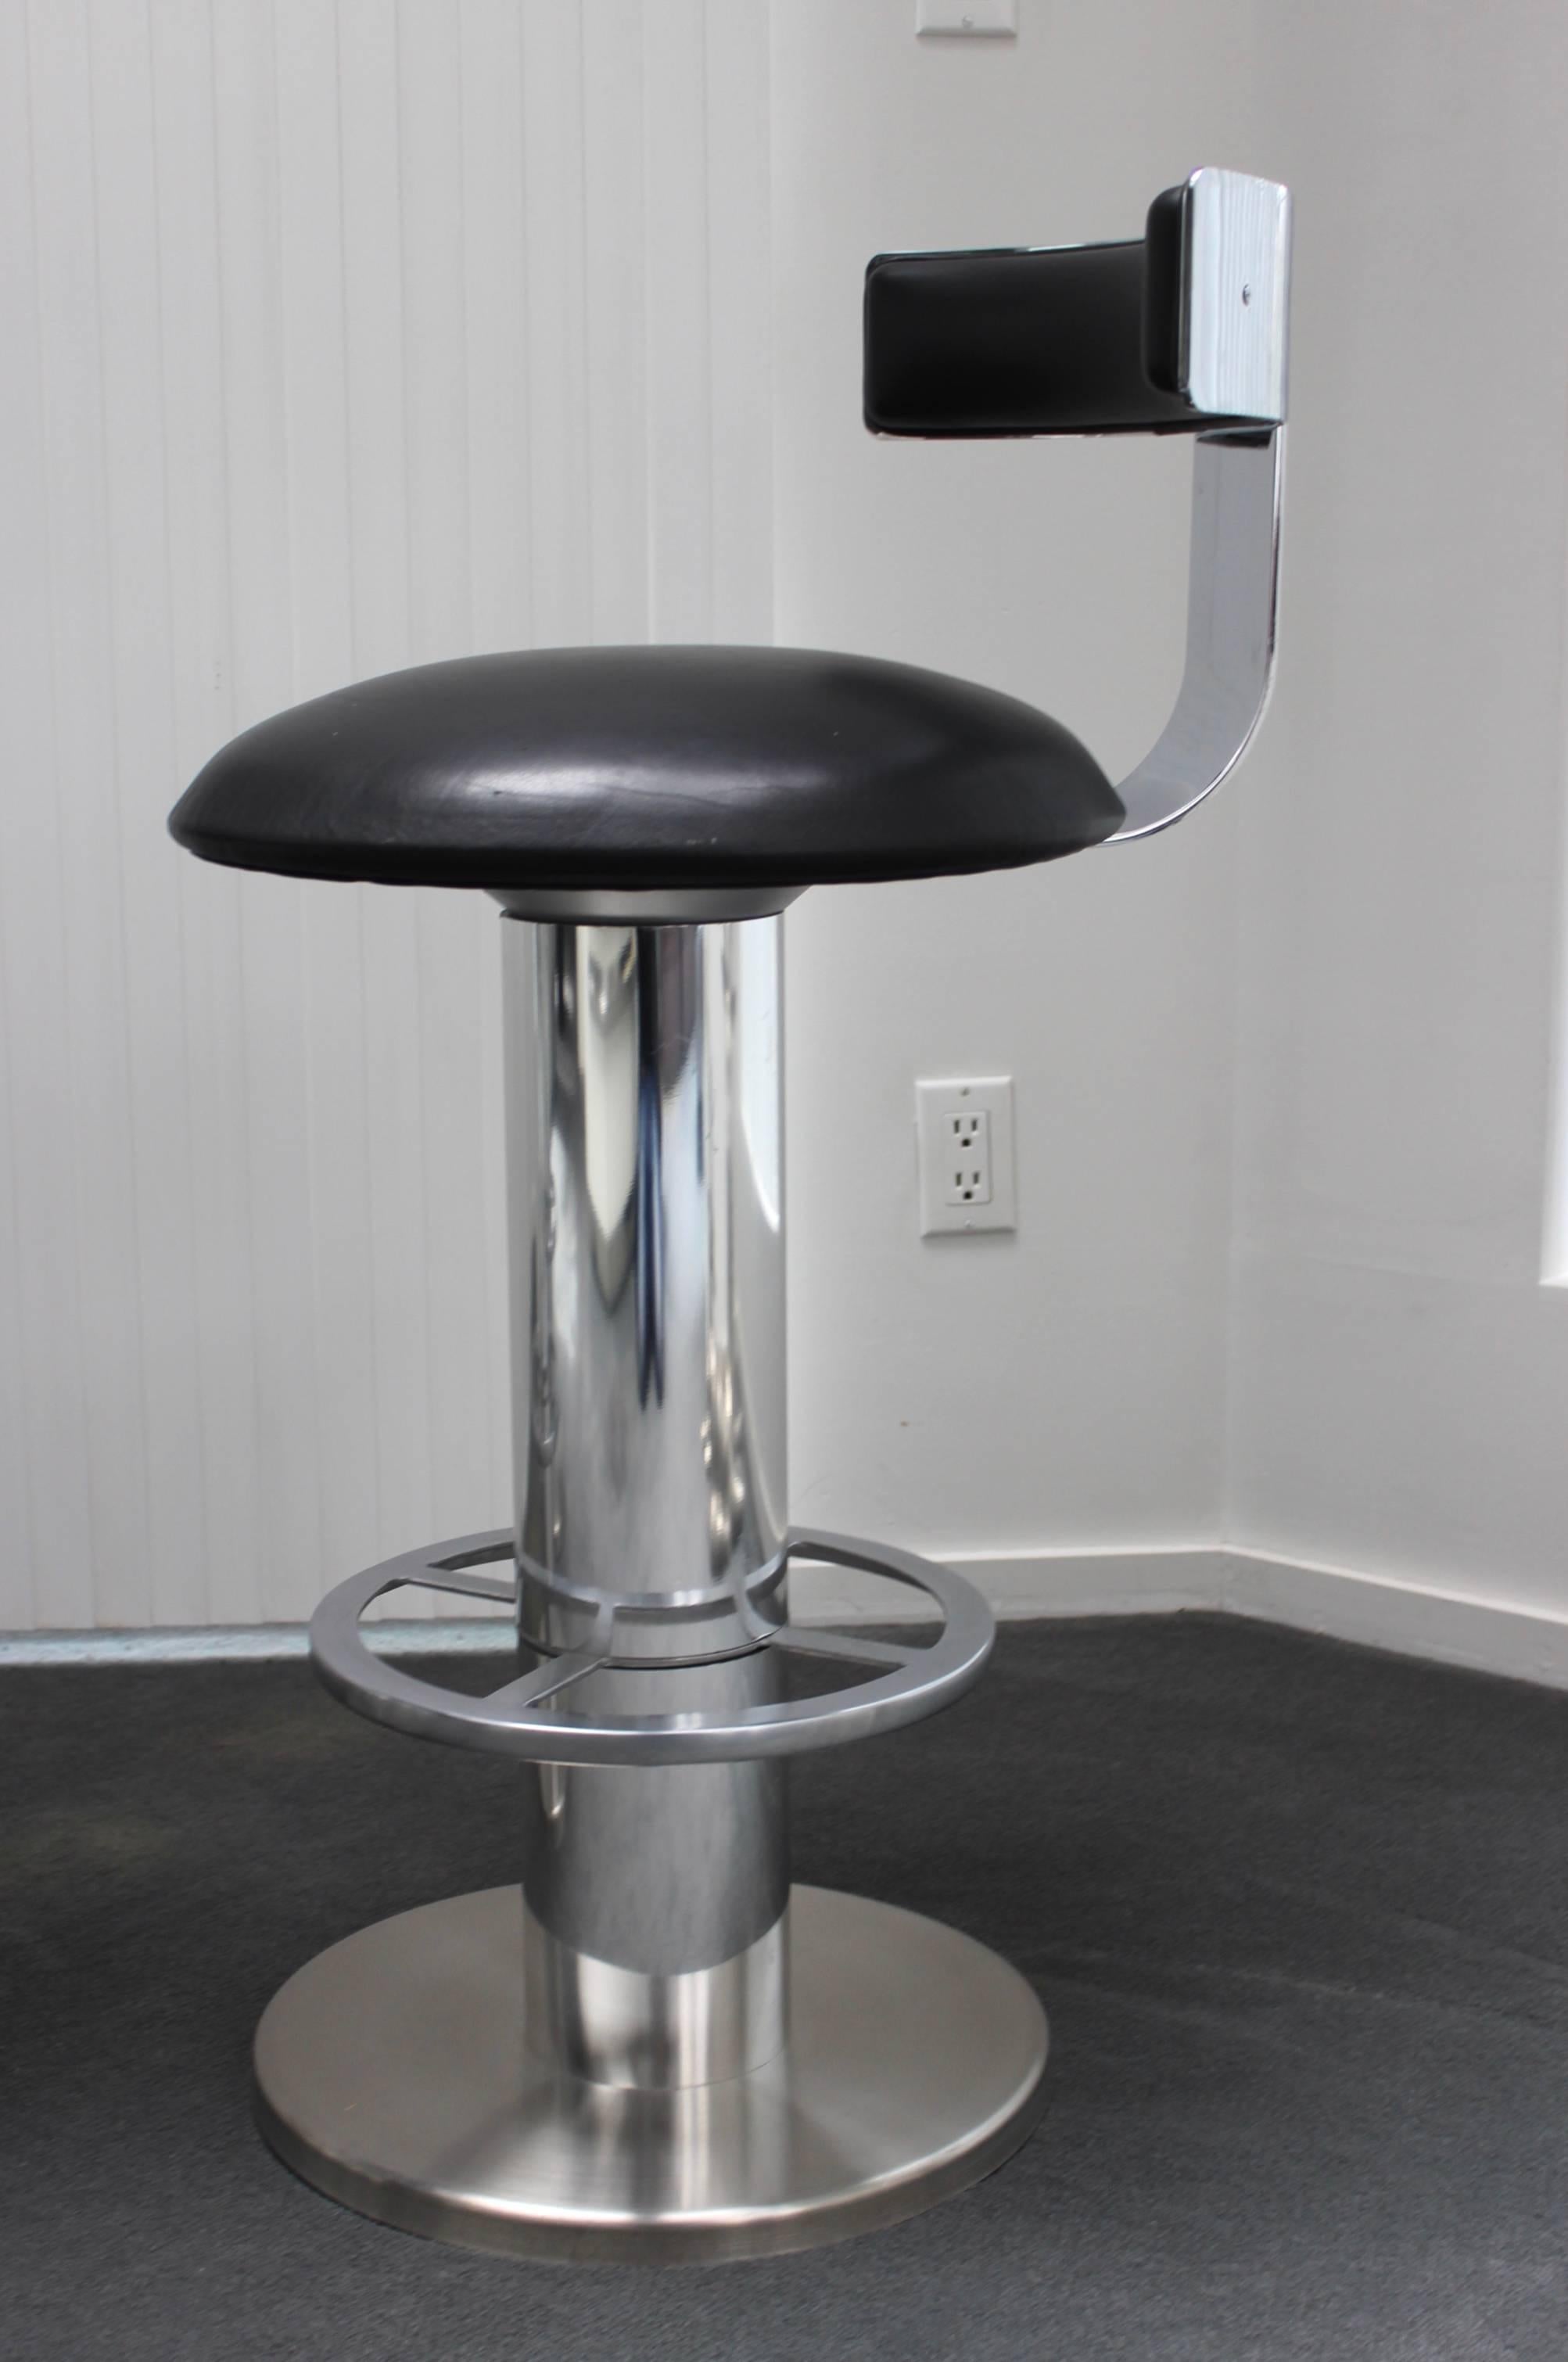 American Designs for Leisure Chrome and Leather Bar Stools